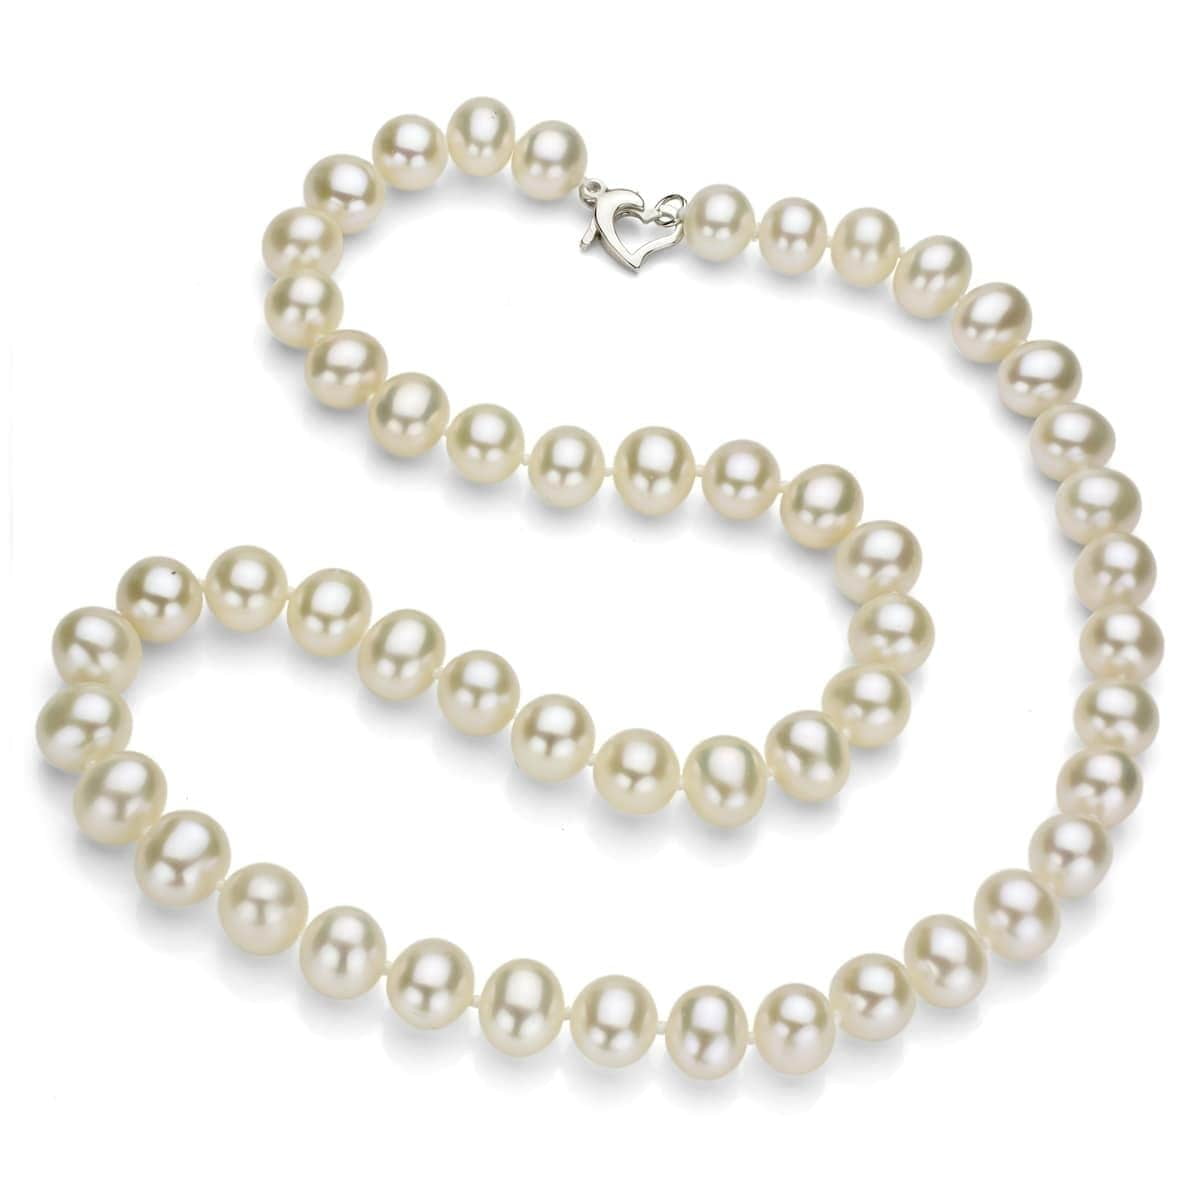 AA 6-7mm white fresh water pearls necklace 18" AAA